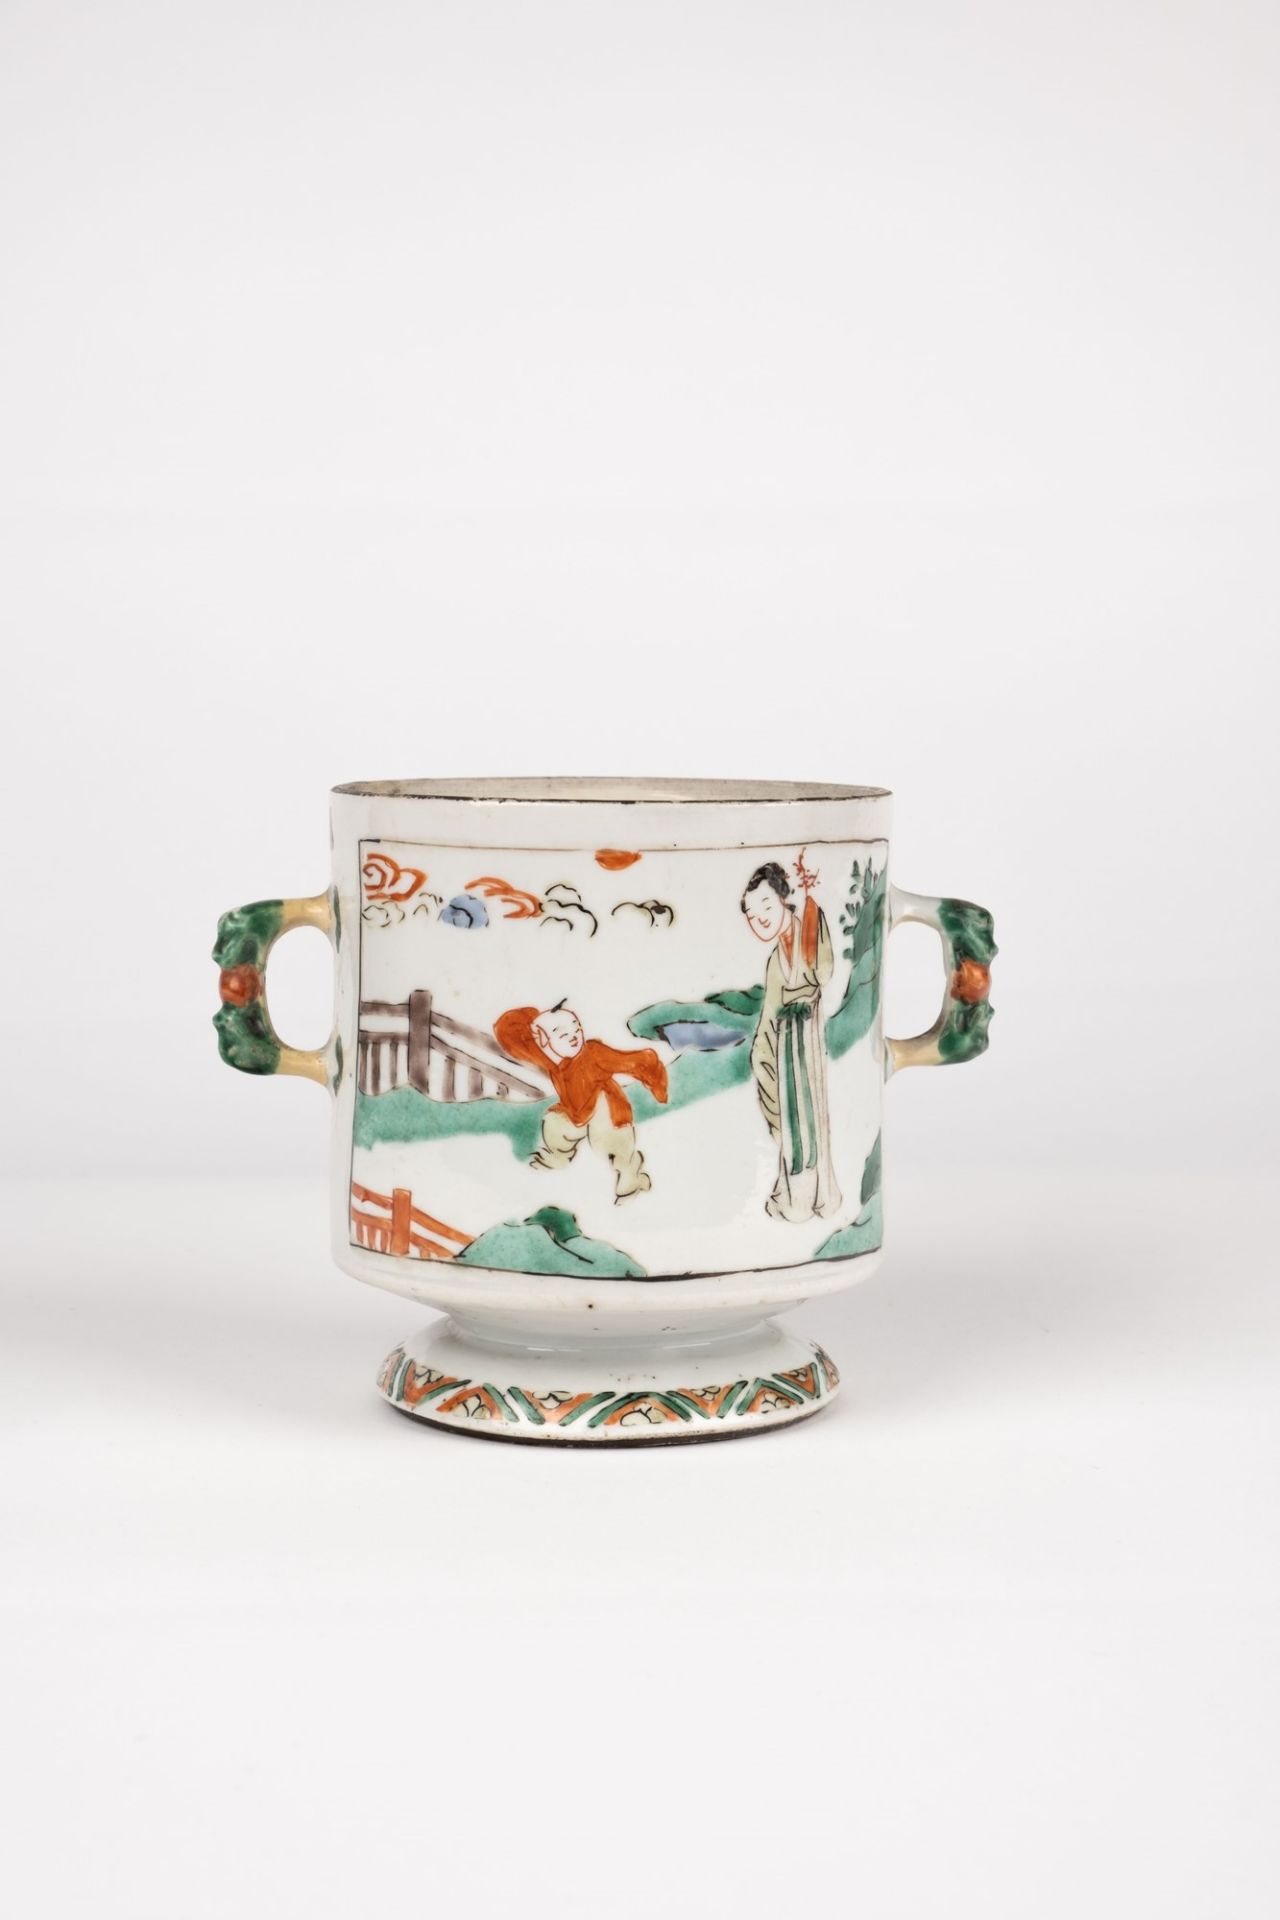 A two-handled Famille Verte vase. China, Kangxi Period (1661-1722) - Image 2 of 2